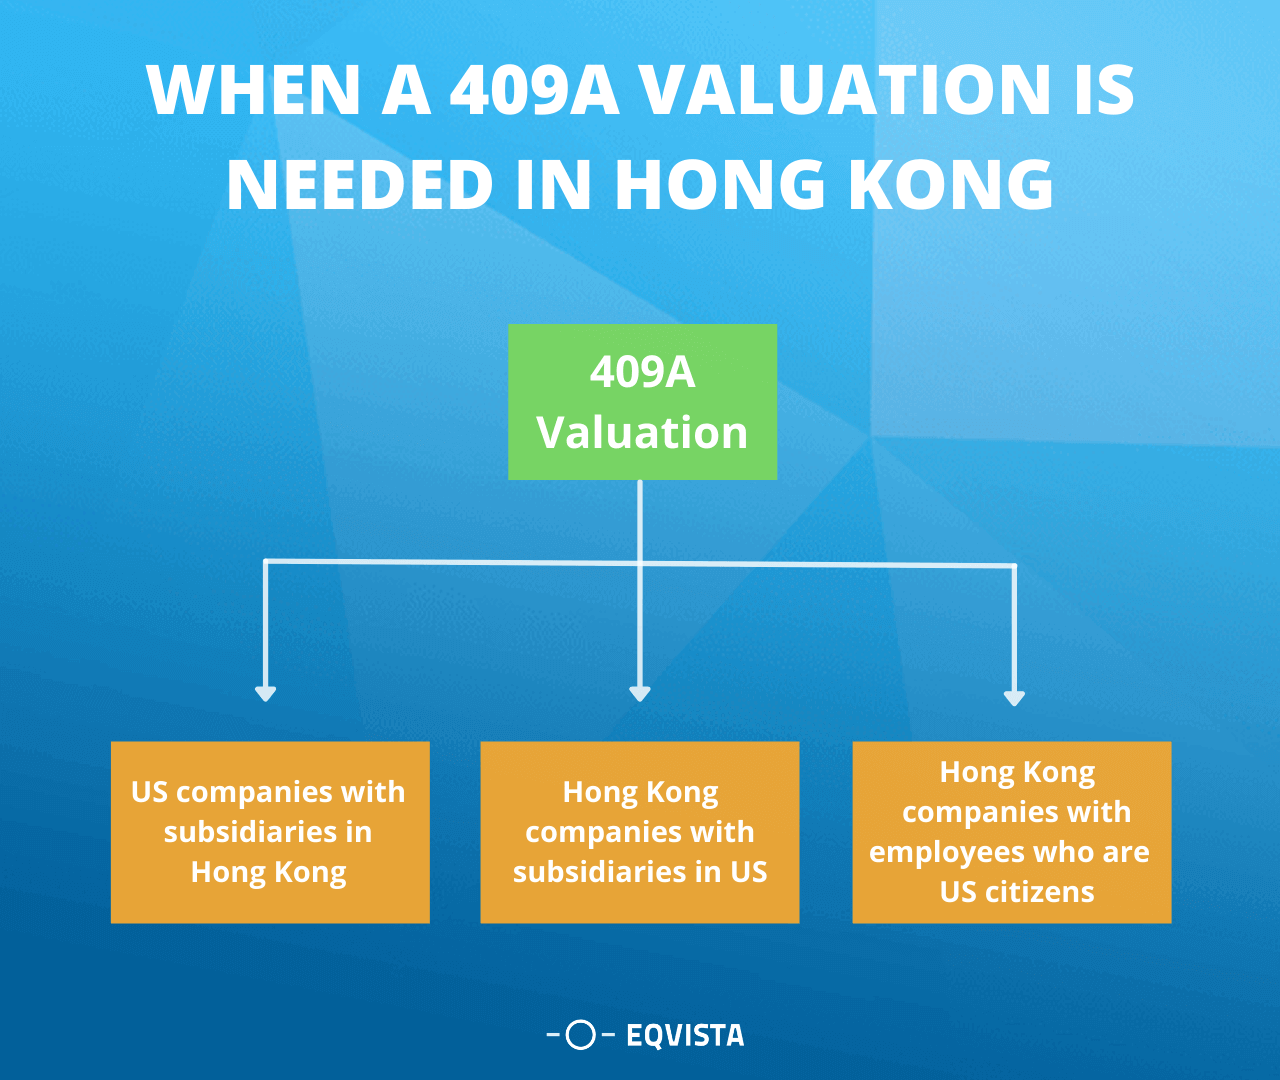 When a 409a valuation is required for a Hong Kong company?